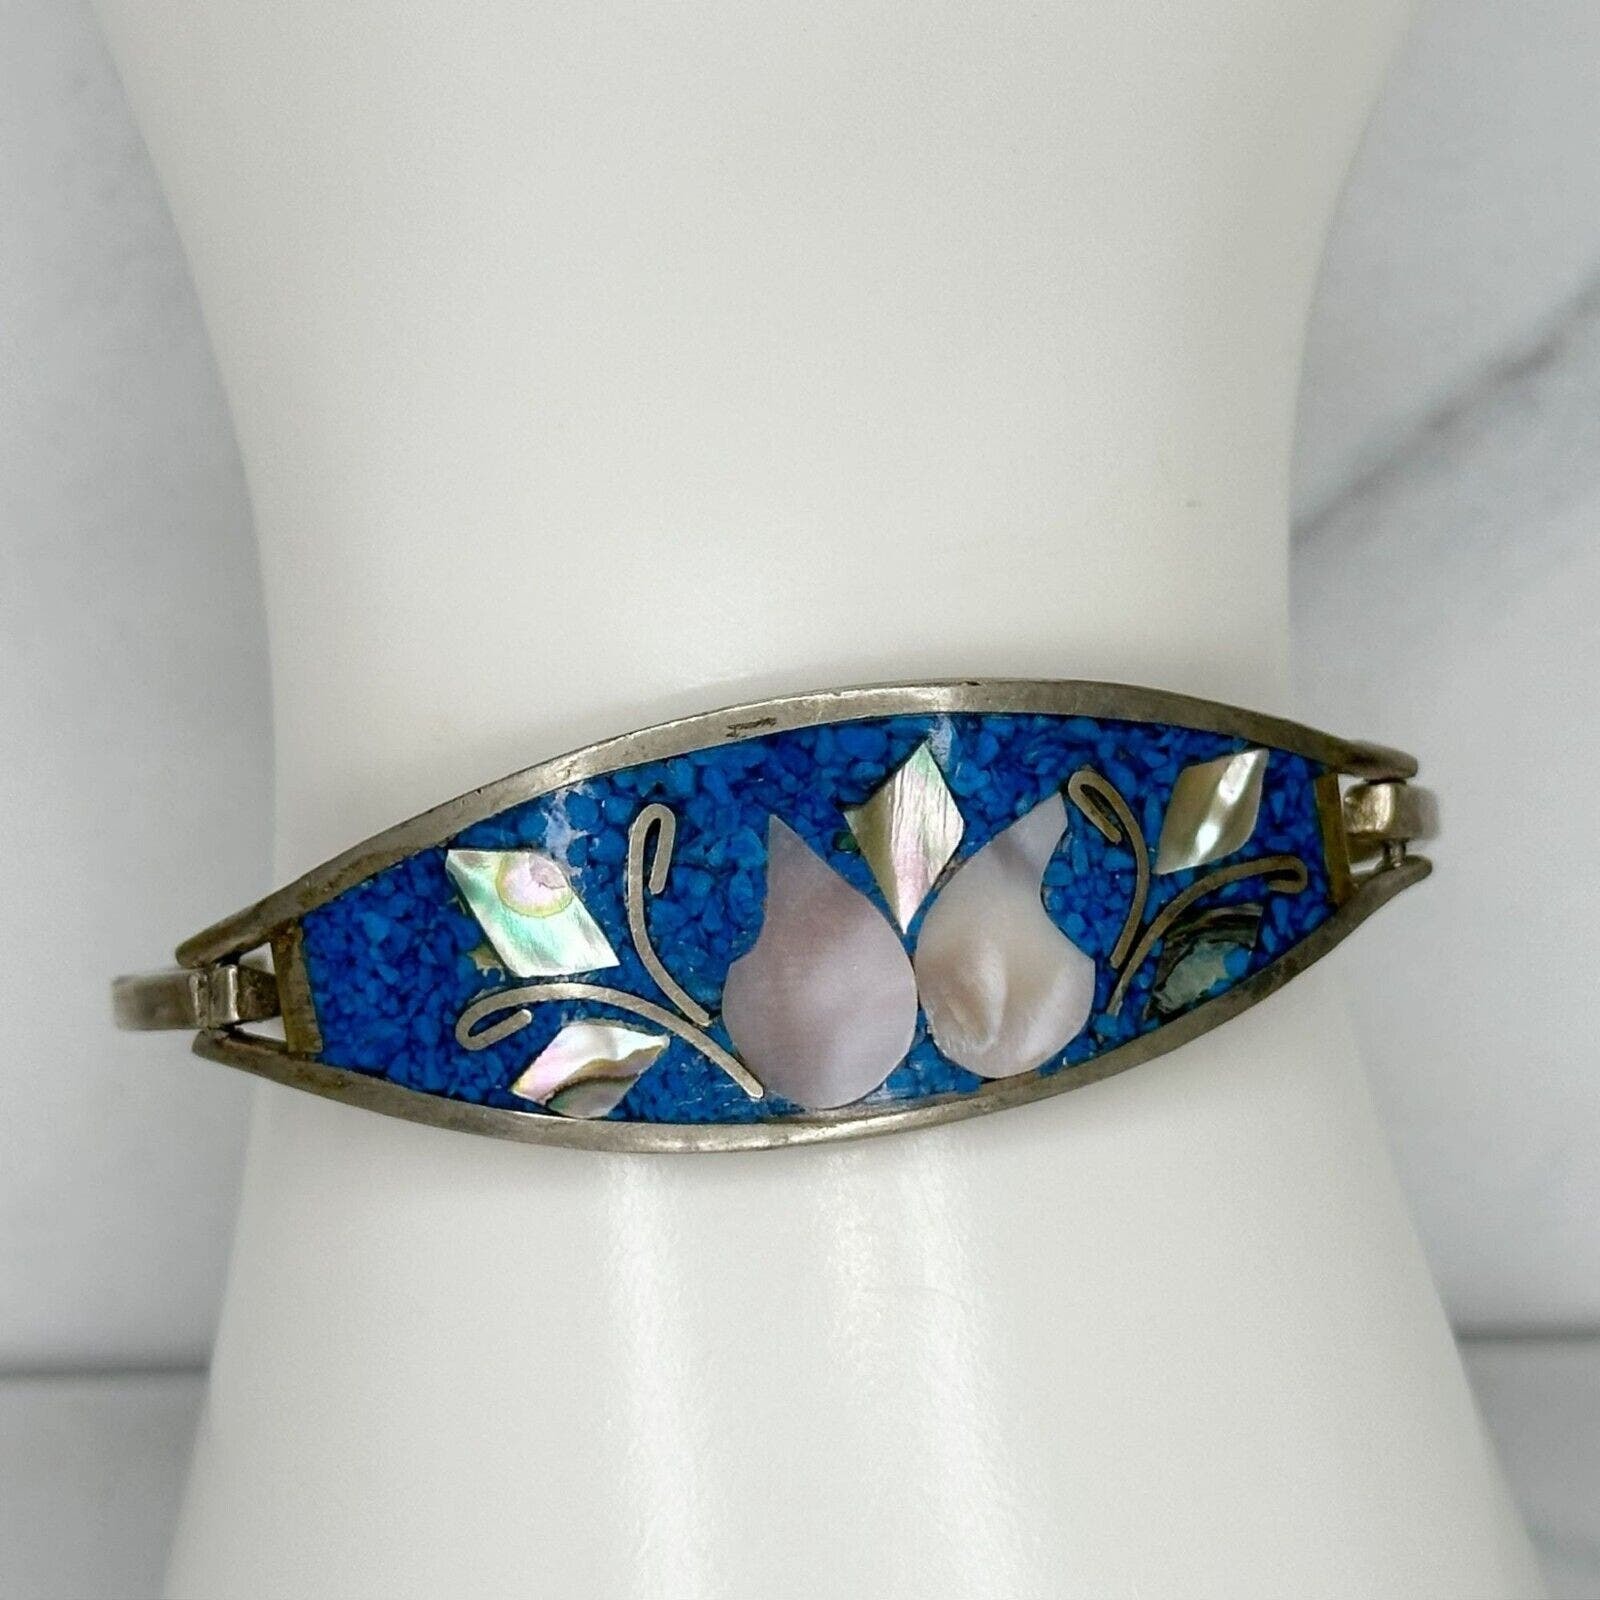 Primary image for Vintage Silver Tone Mother of Pearl Flower Inlay Bangle Bracelet